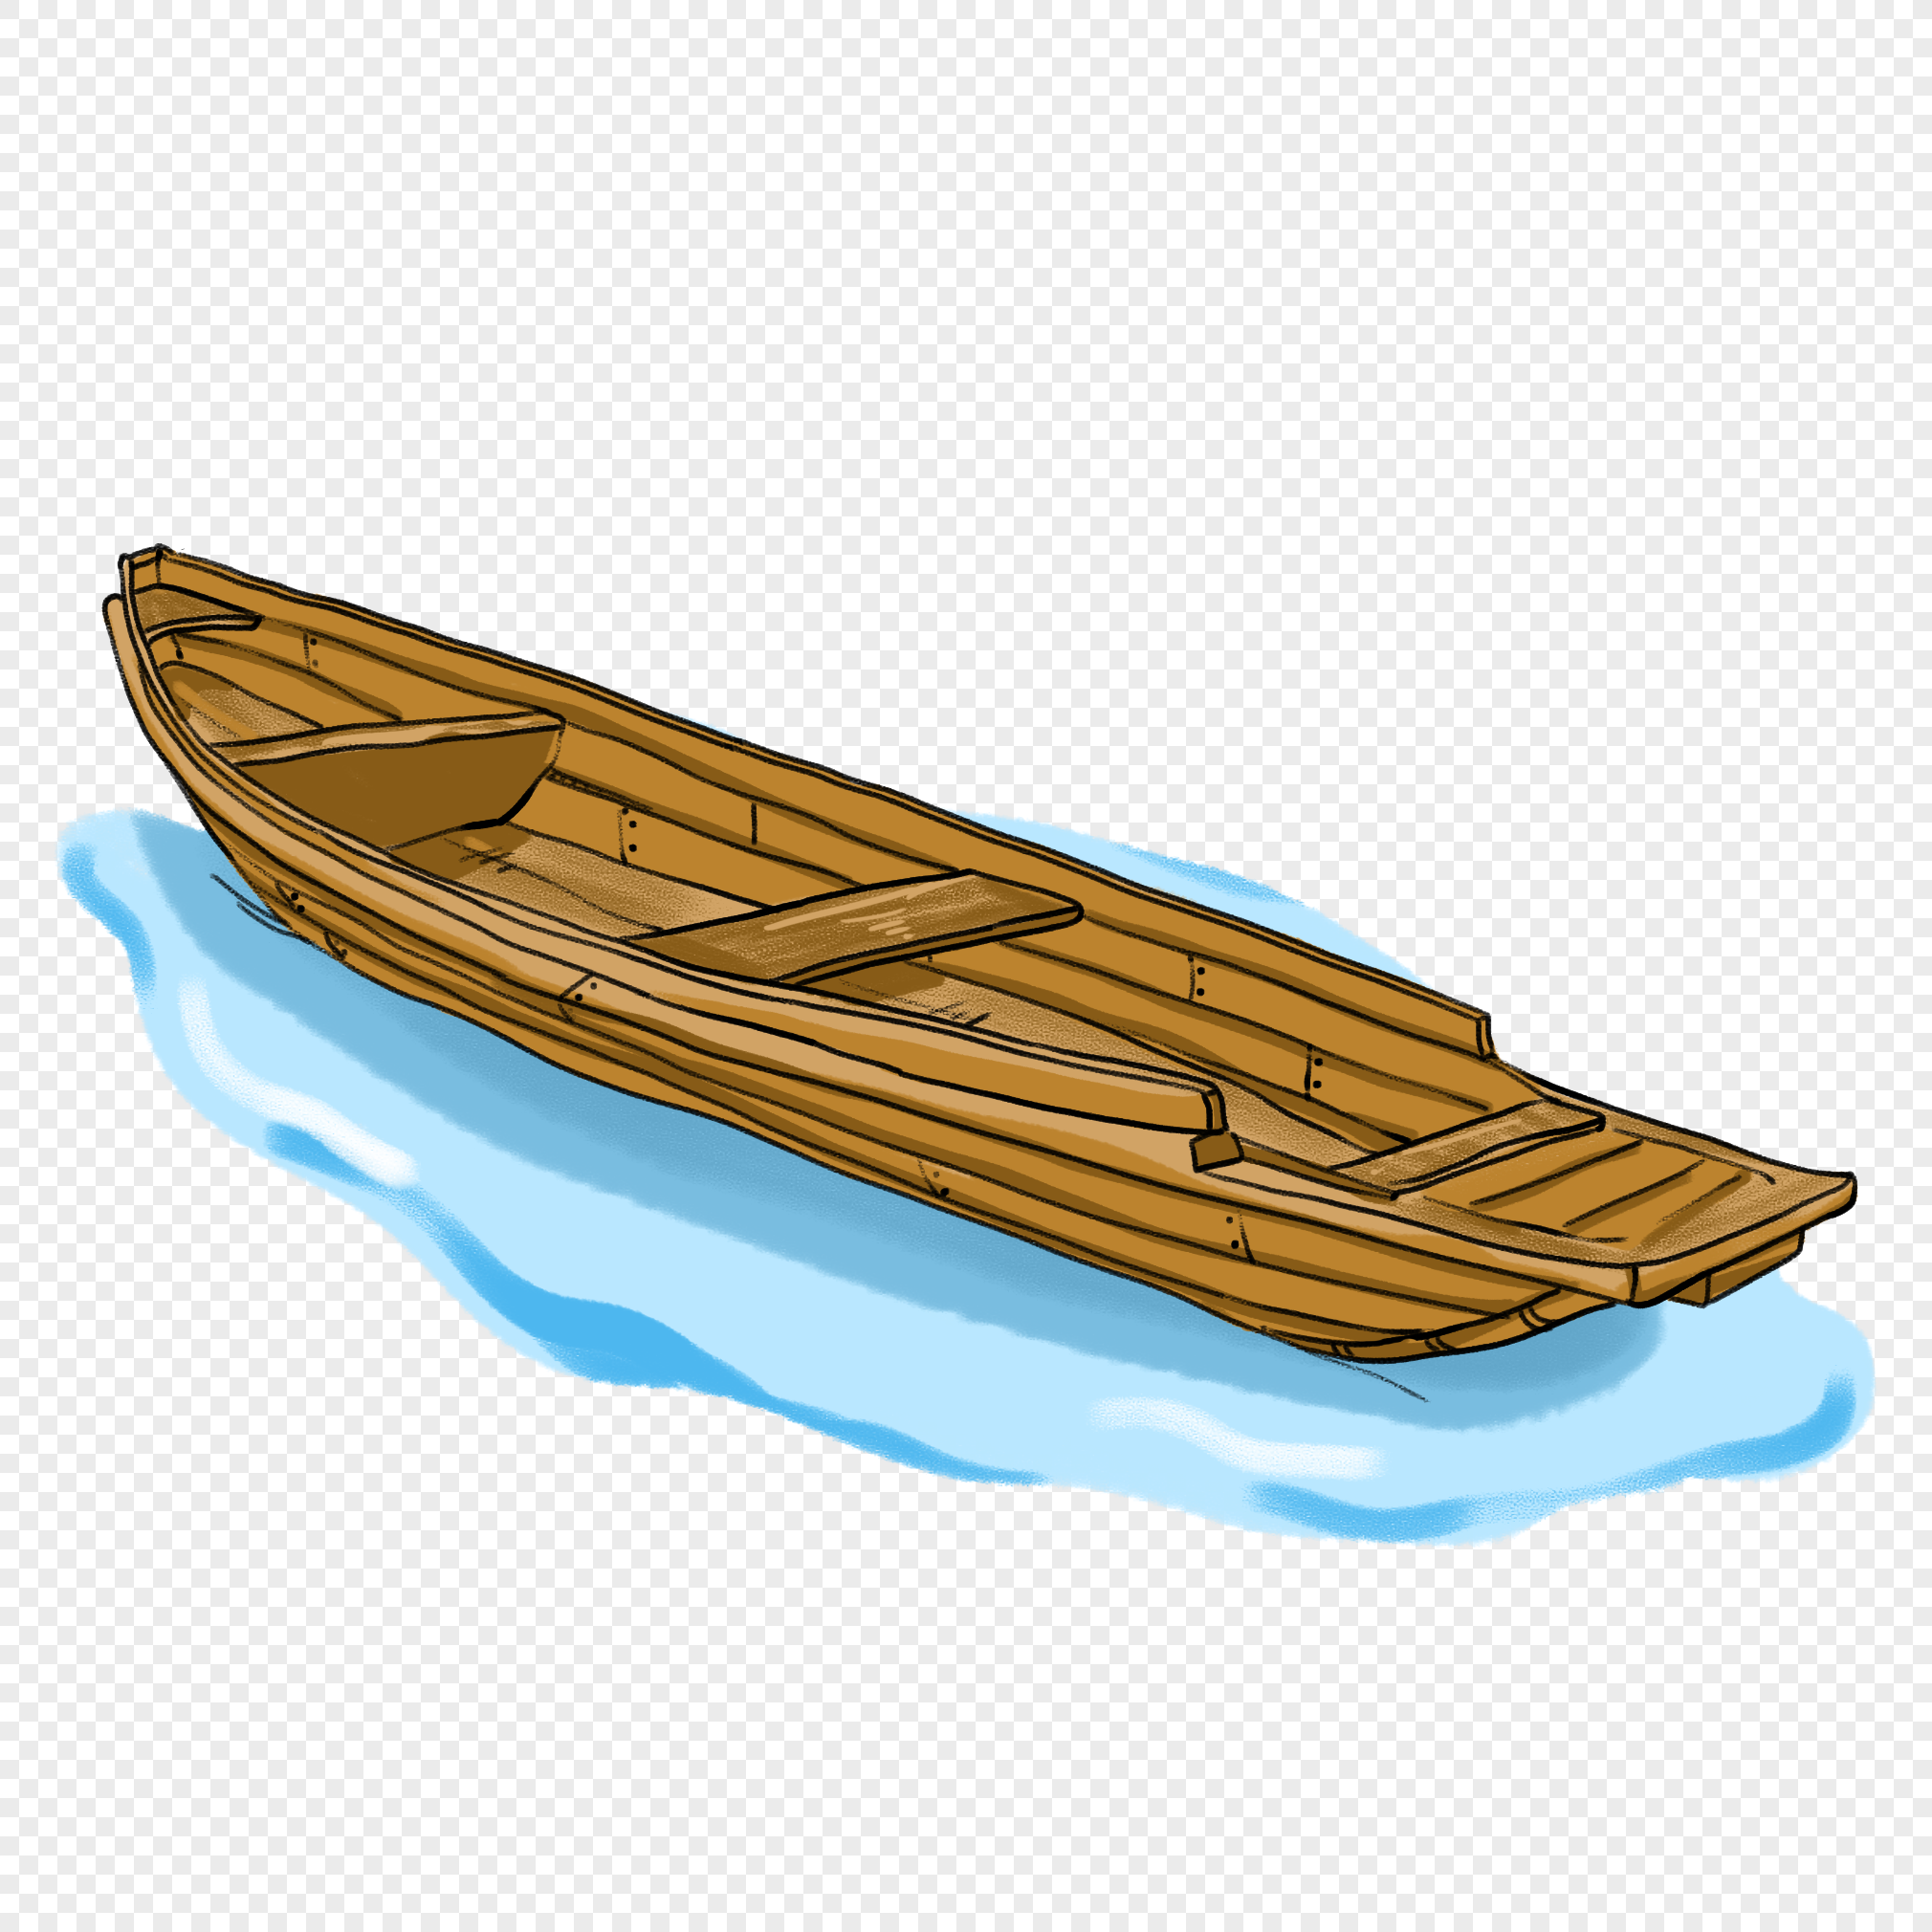 Small boat, lake, traffic, small boat png free download